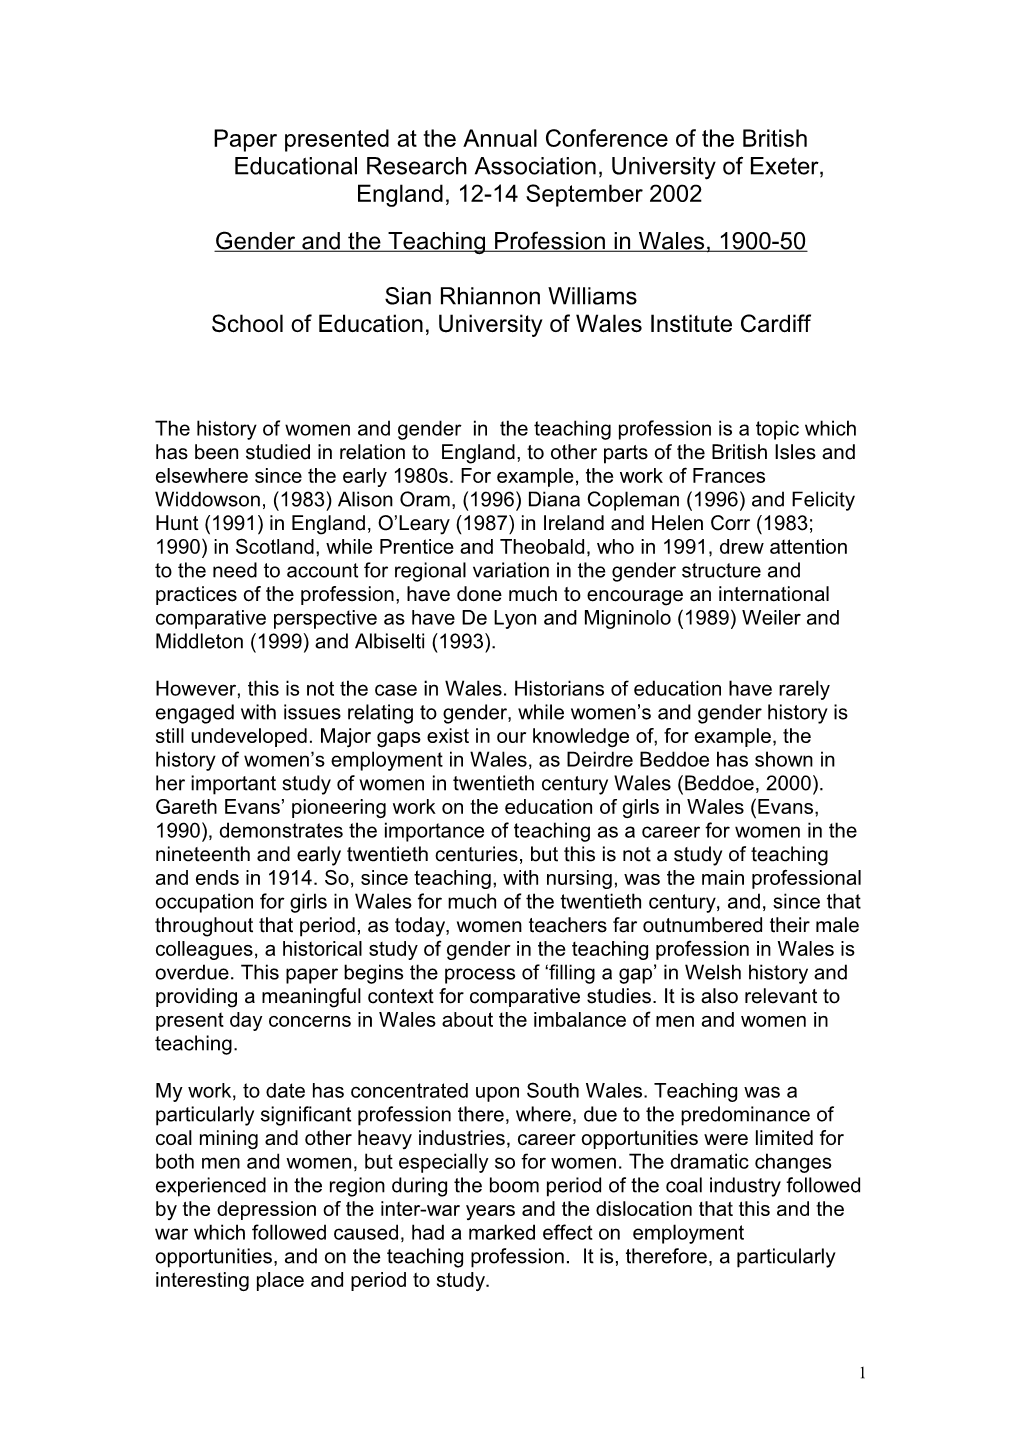 Gender and the Teaching Profession in Wales, 1900-50